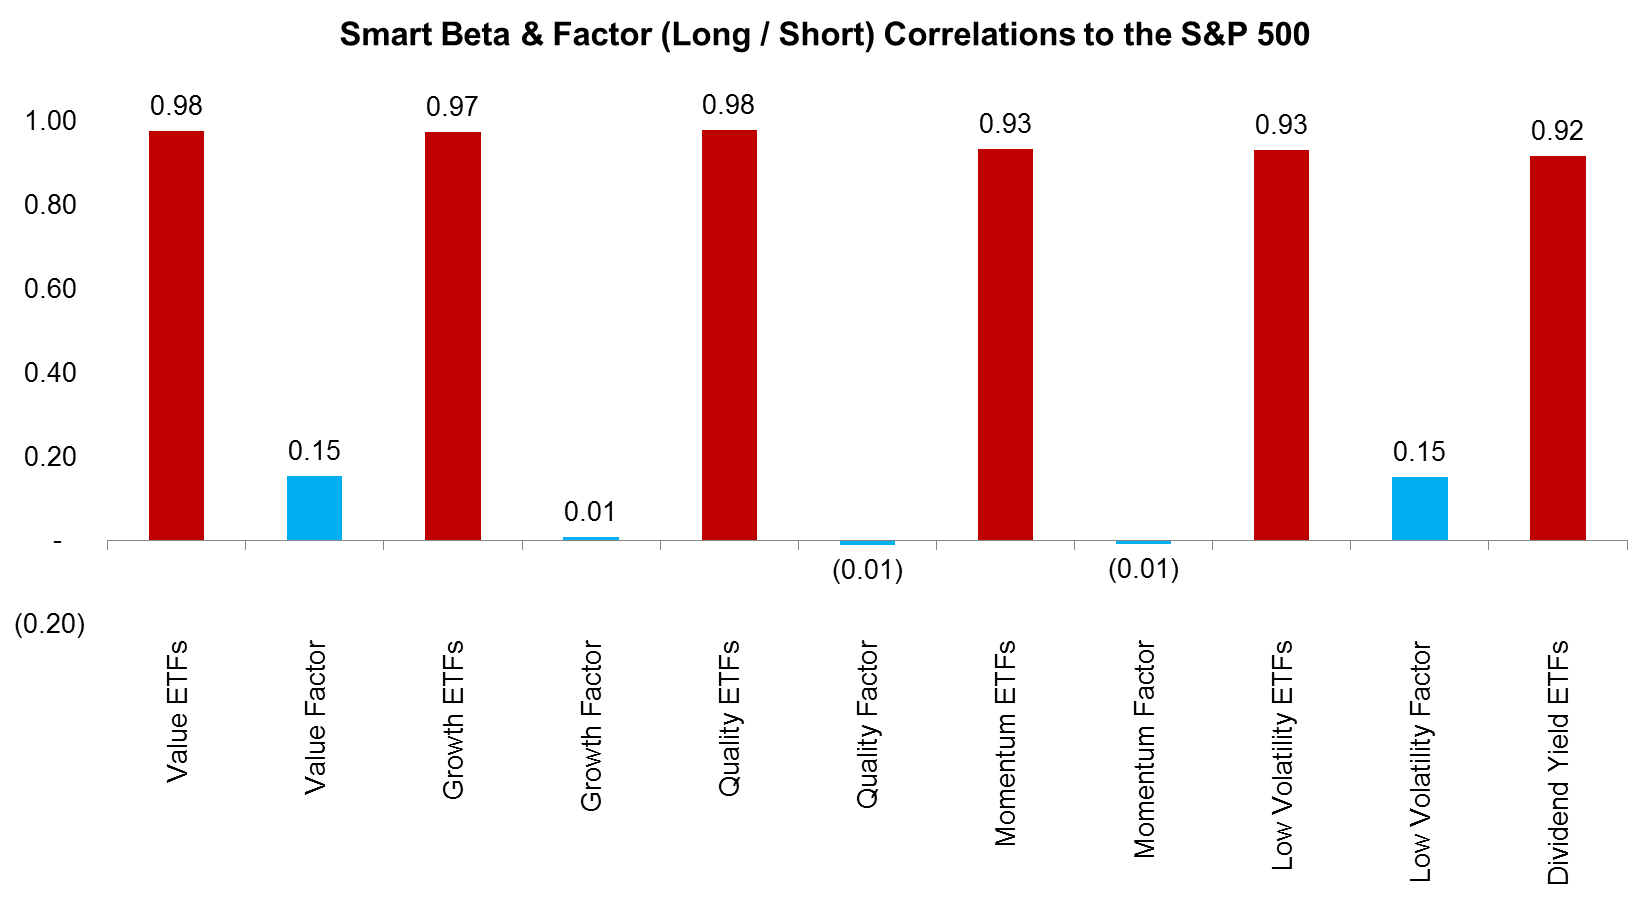 Smart Beta & Factor (Long Short) Correlations to the S&P 500